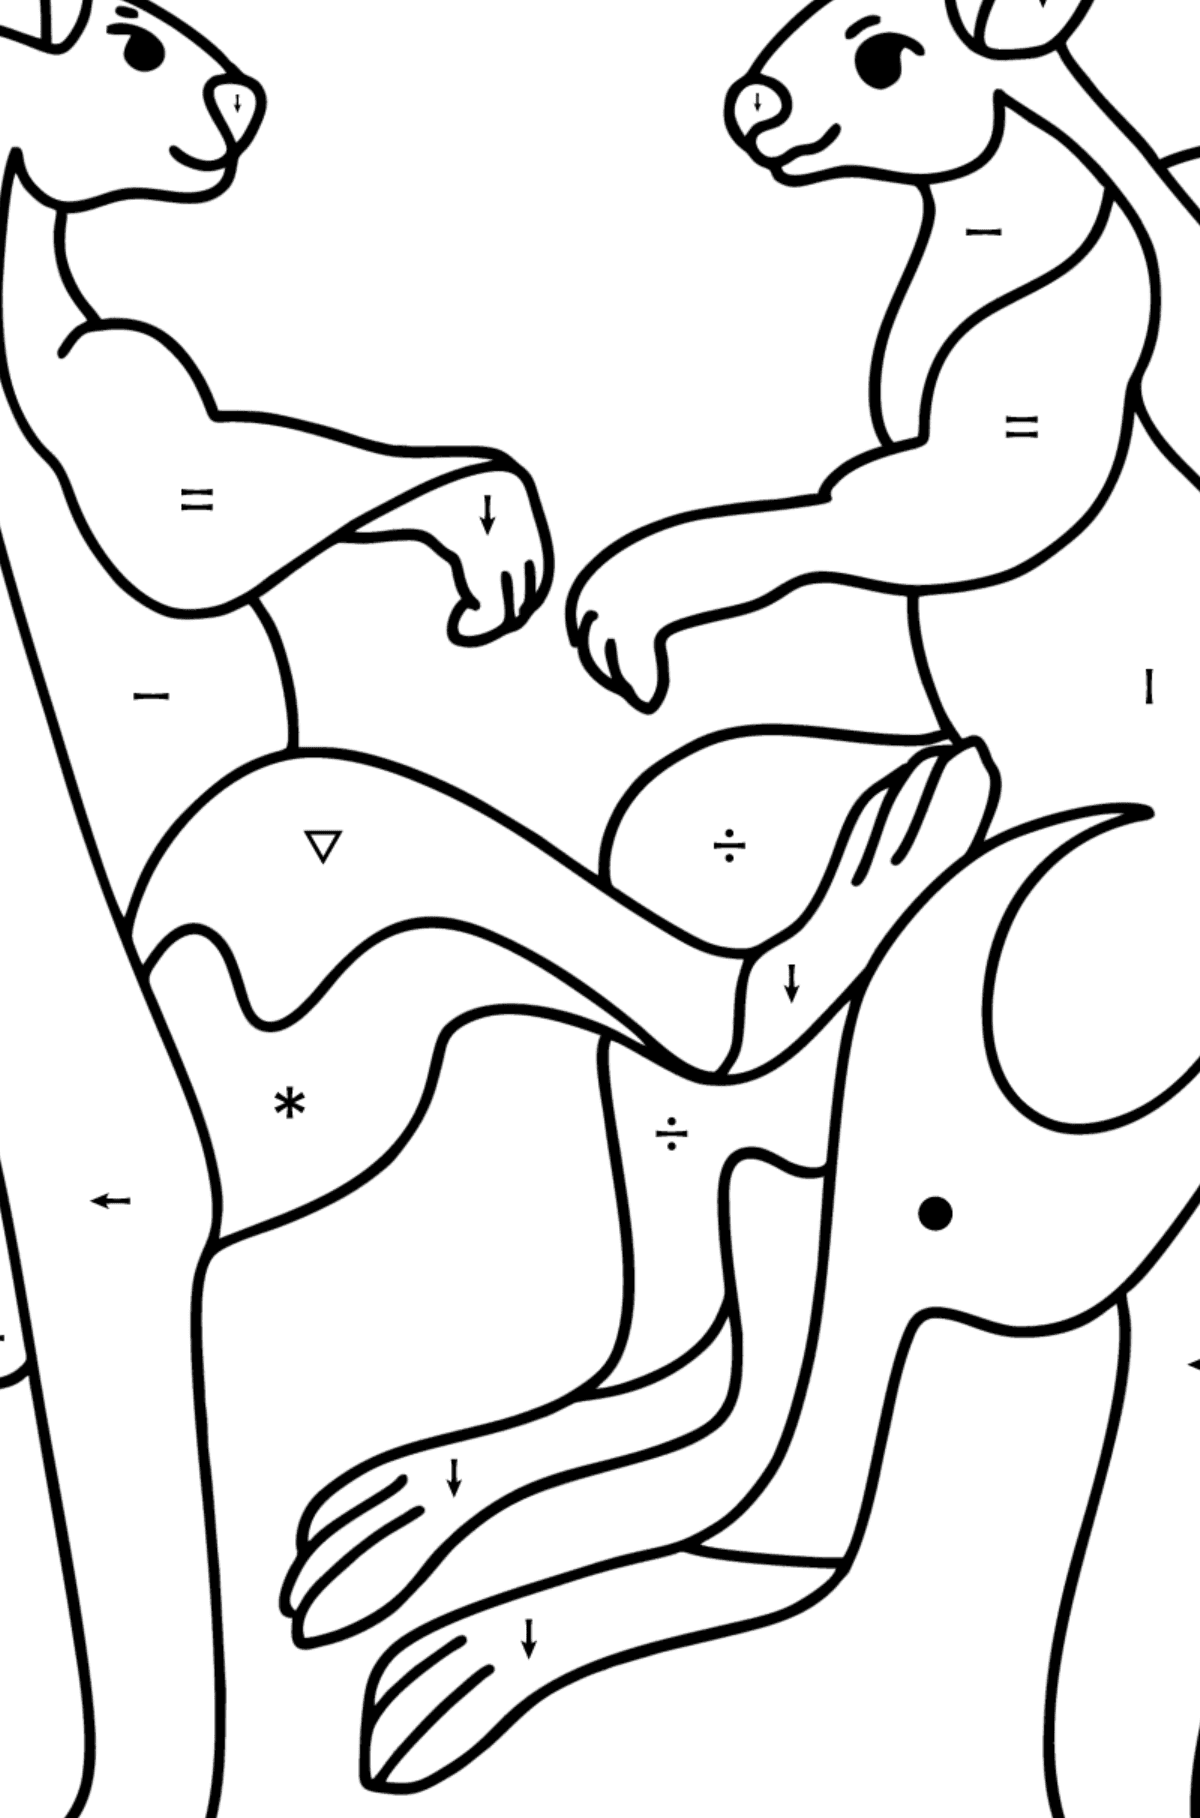 Kangaroo Wrestling coloring page - Coloring by Symbols for Kids